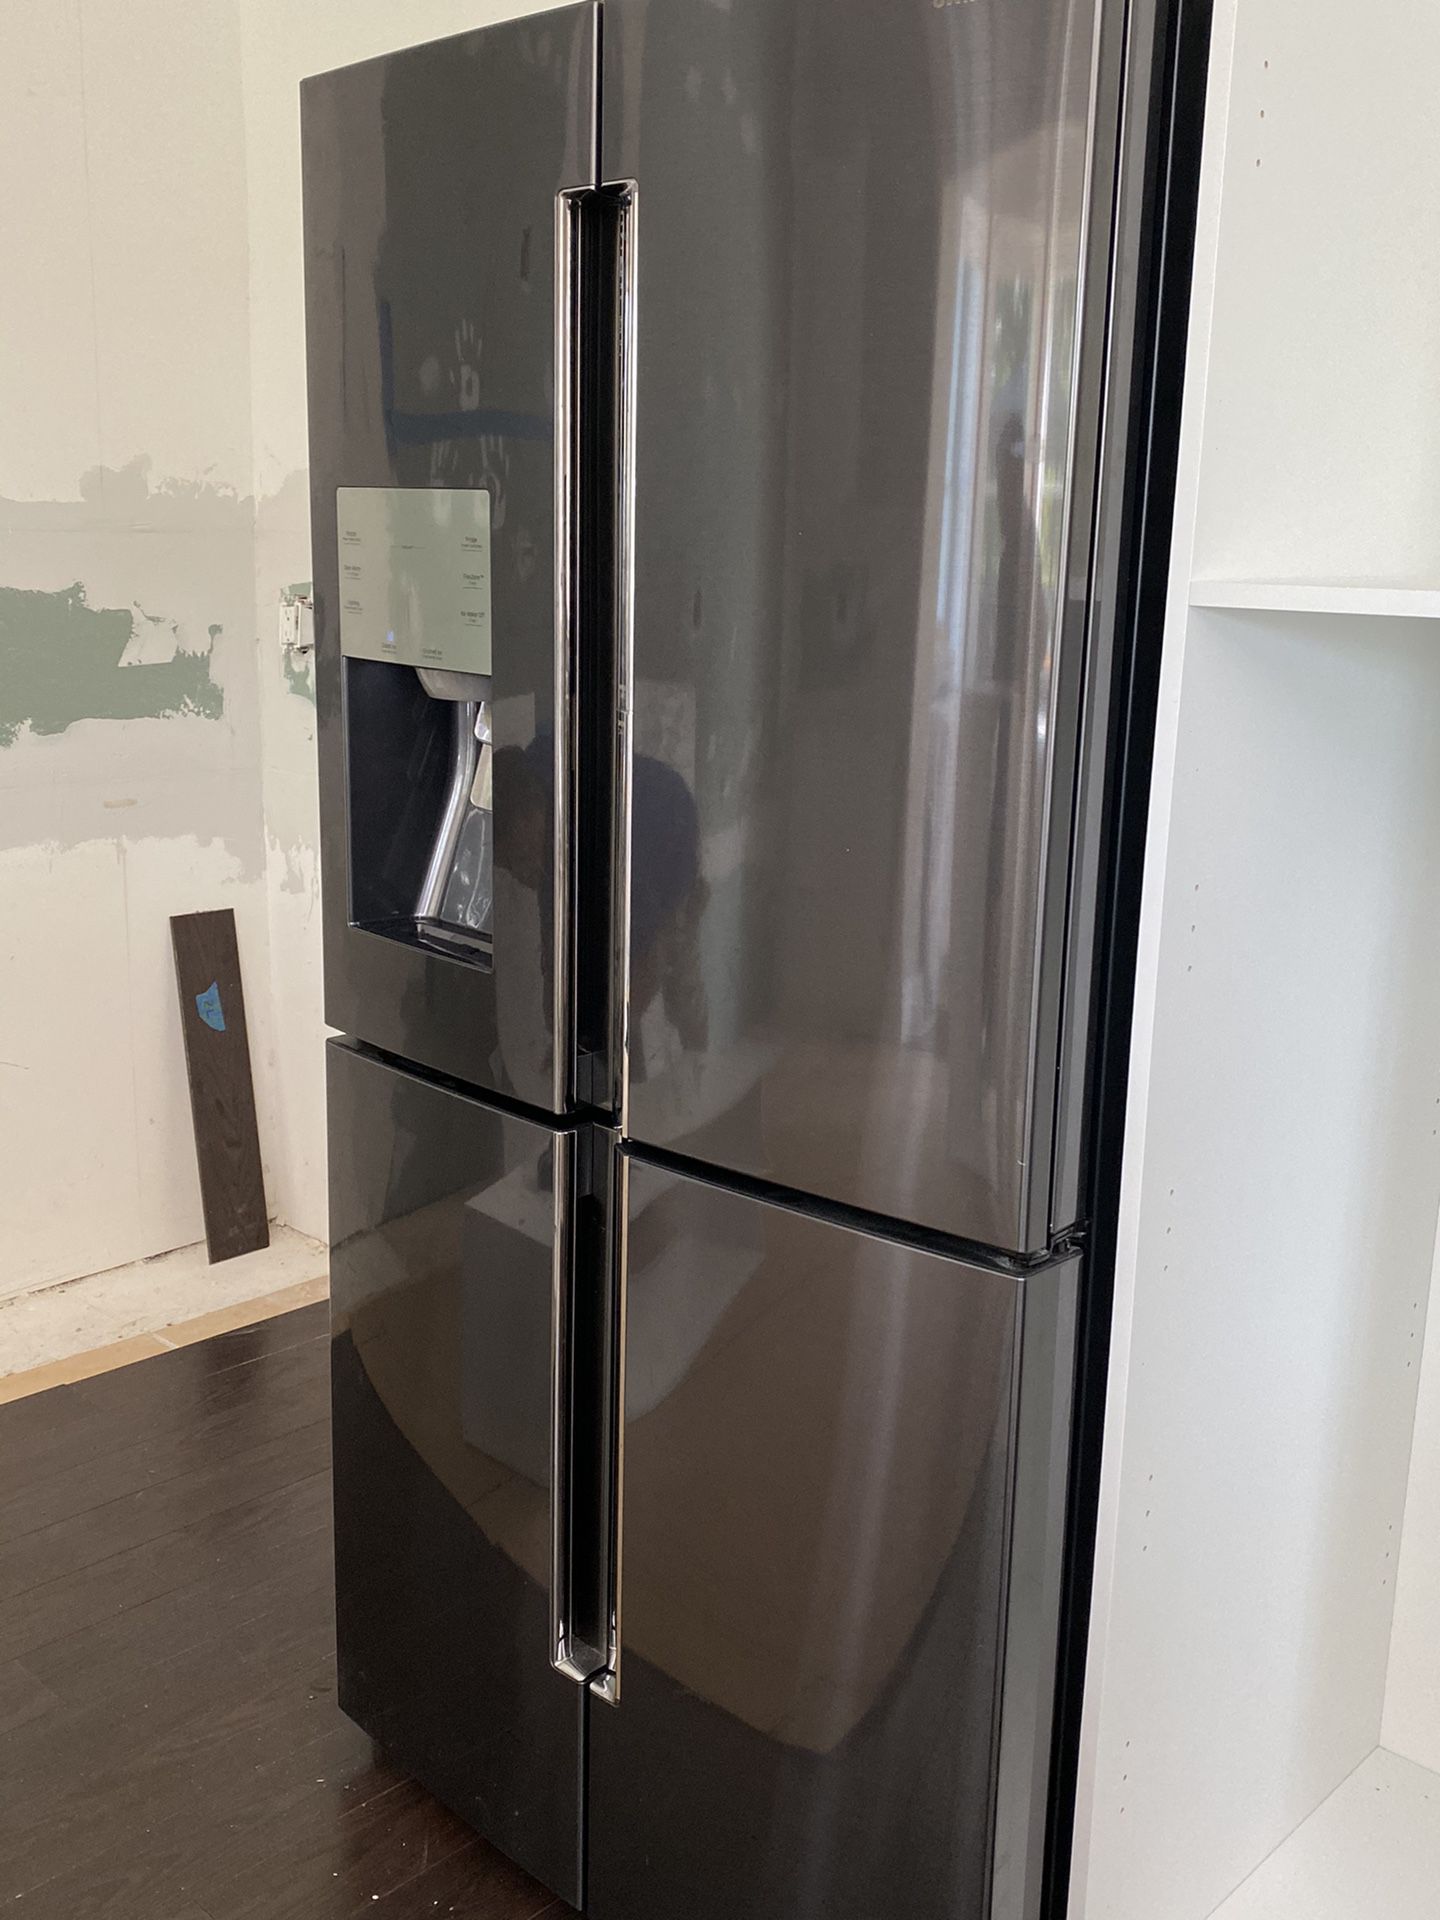 Samsung like new black stainless refrigerator with five year warranty.